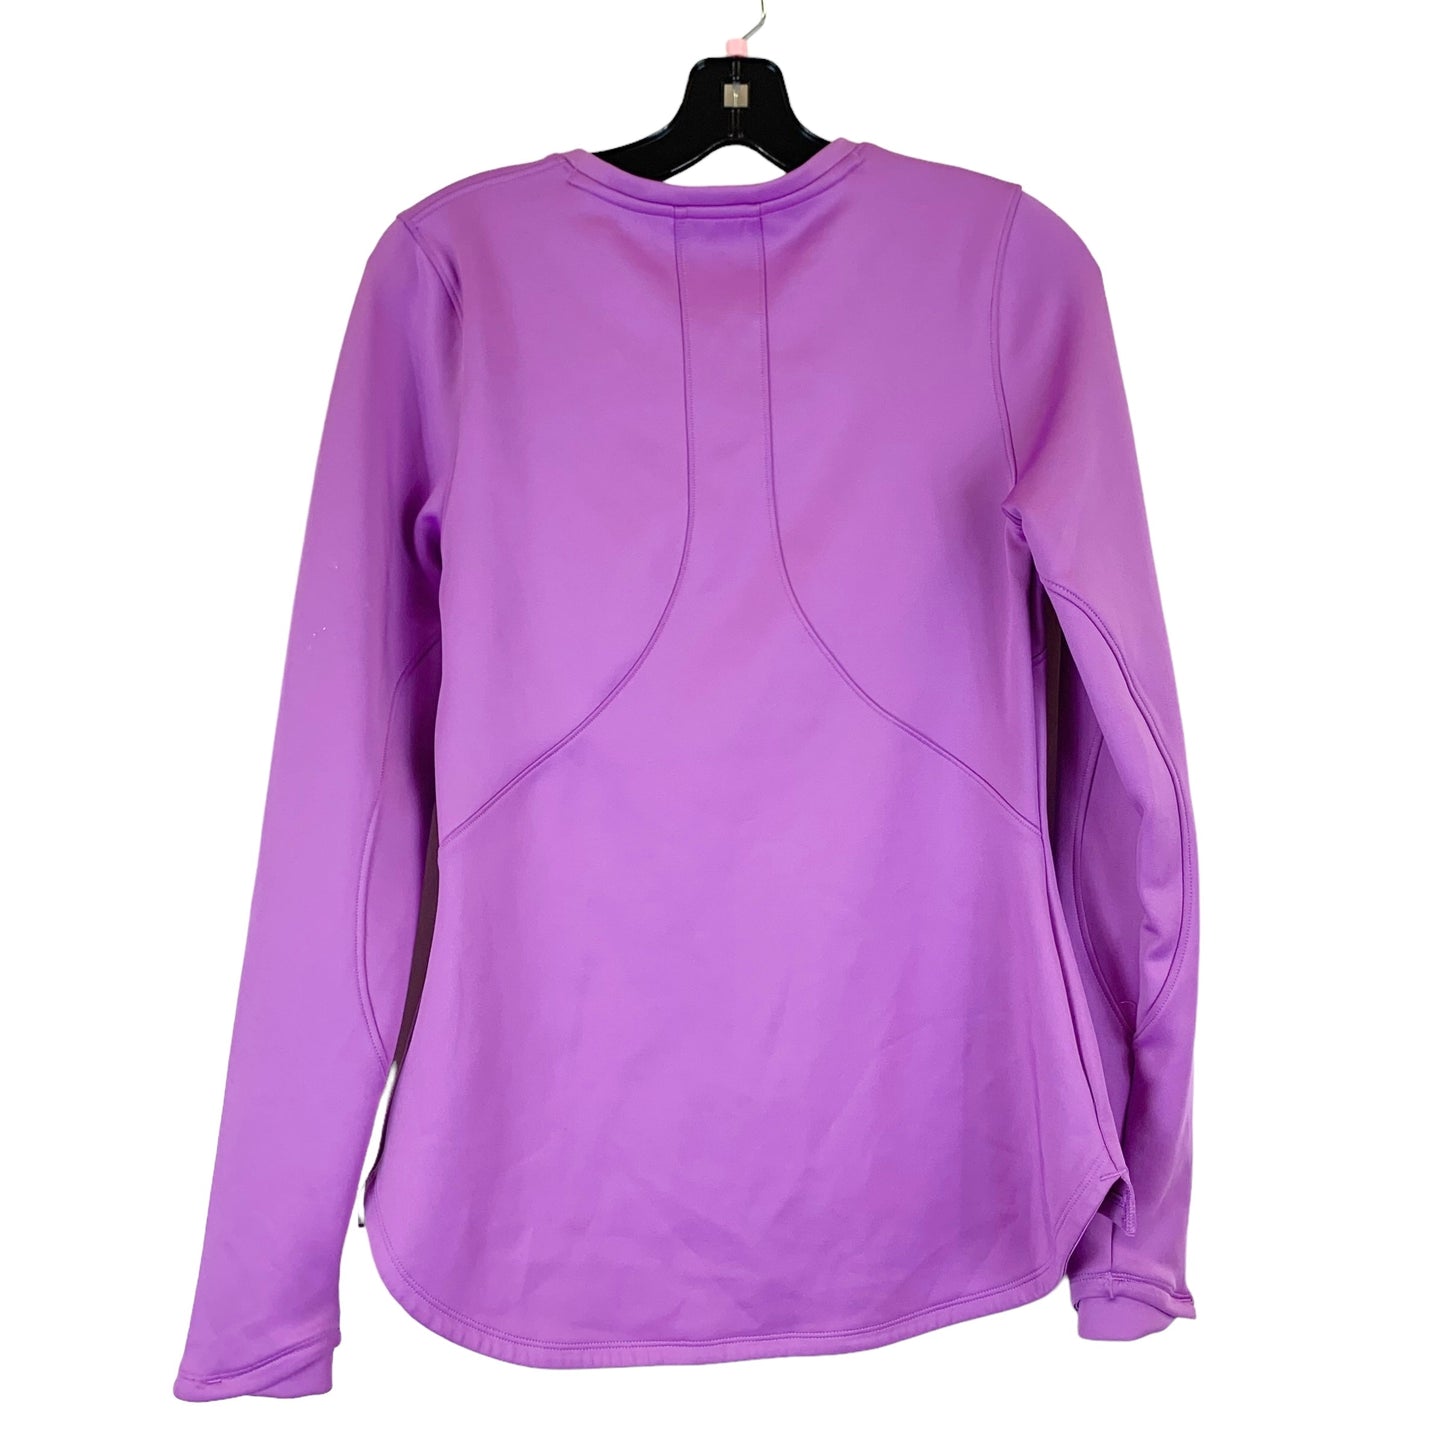 Purple Athletic Top Long Sleeve Collar Under Armour, Size S